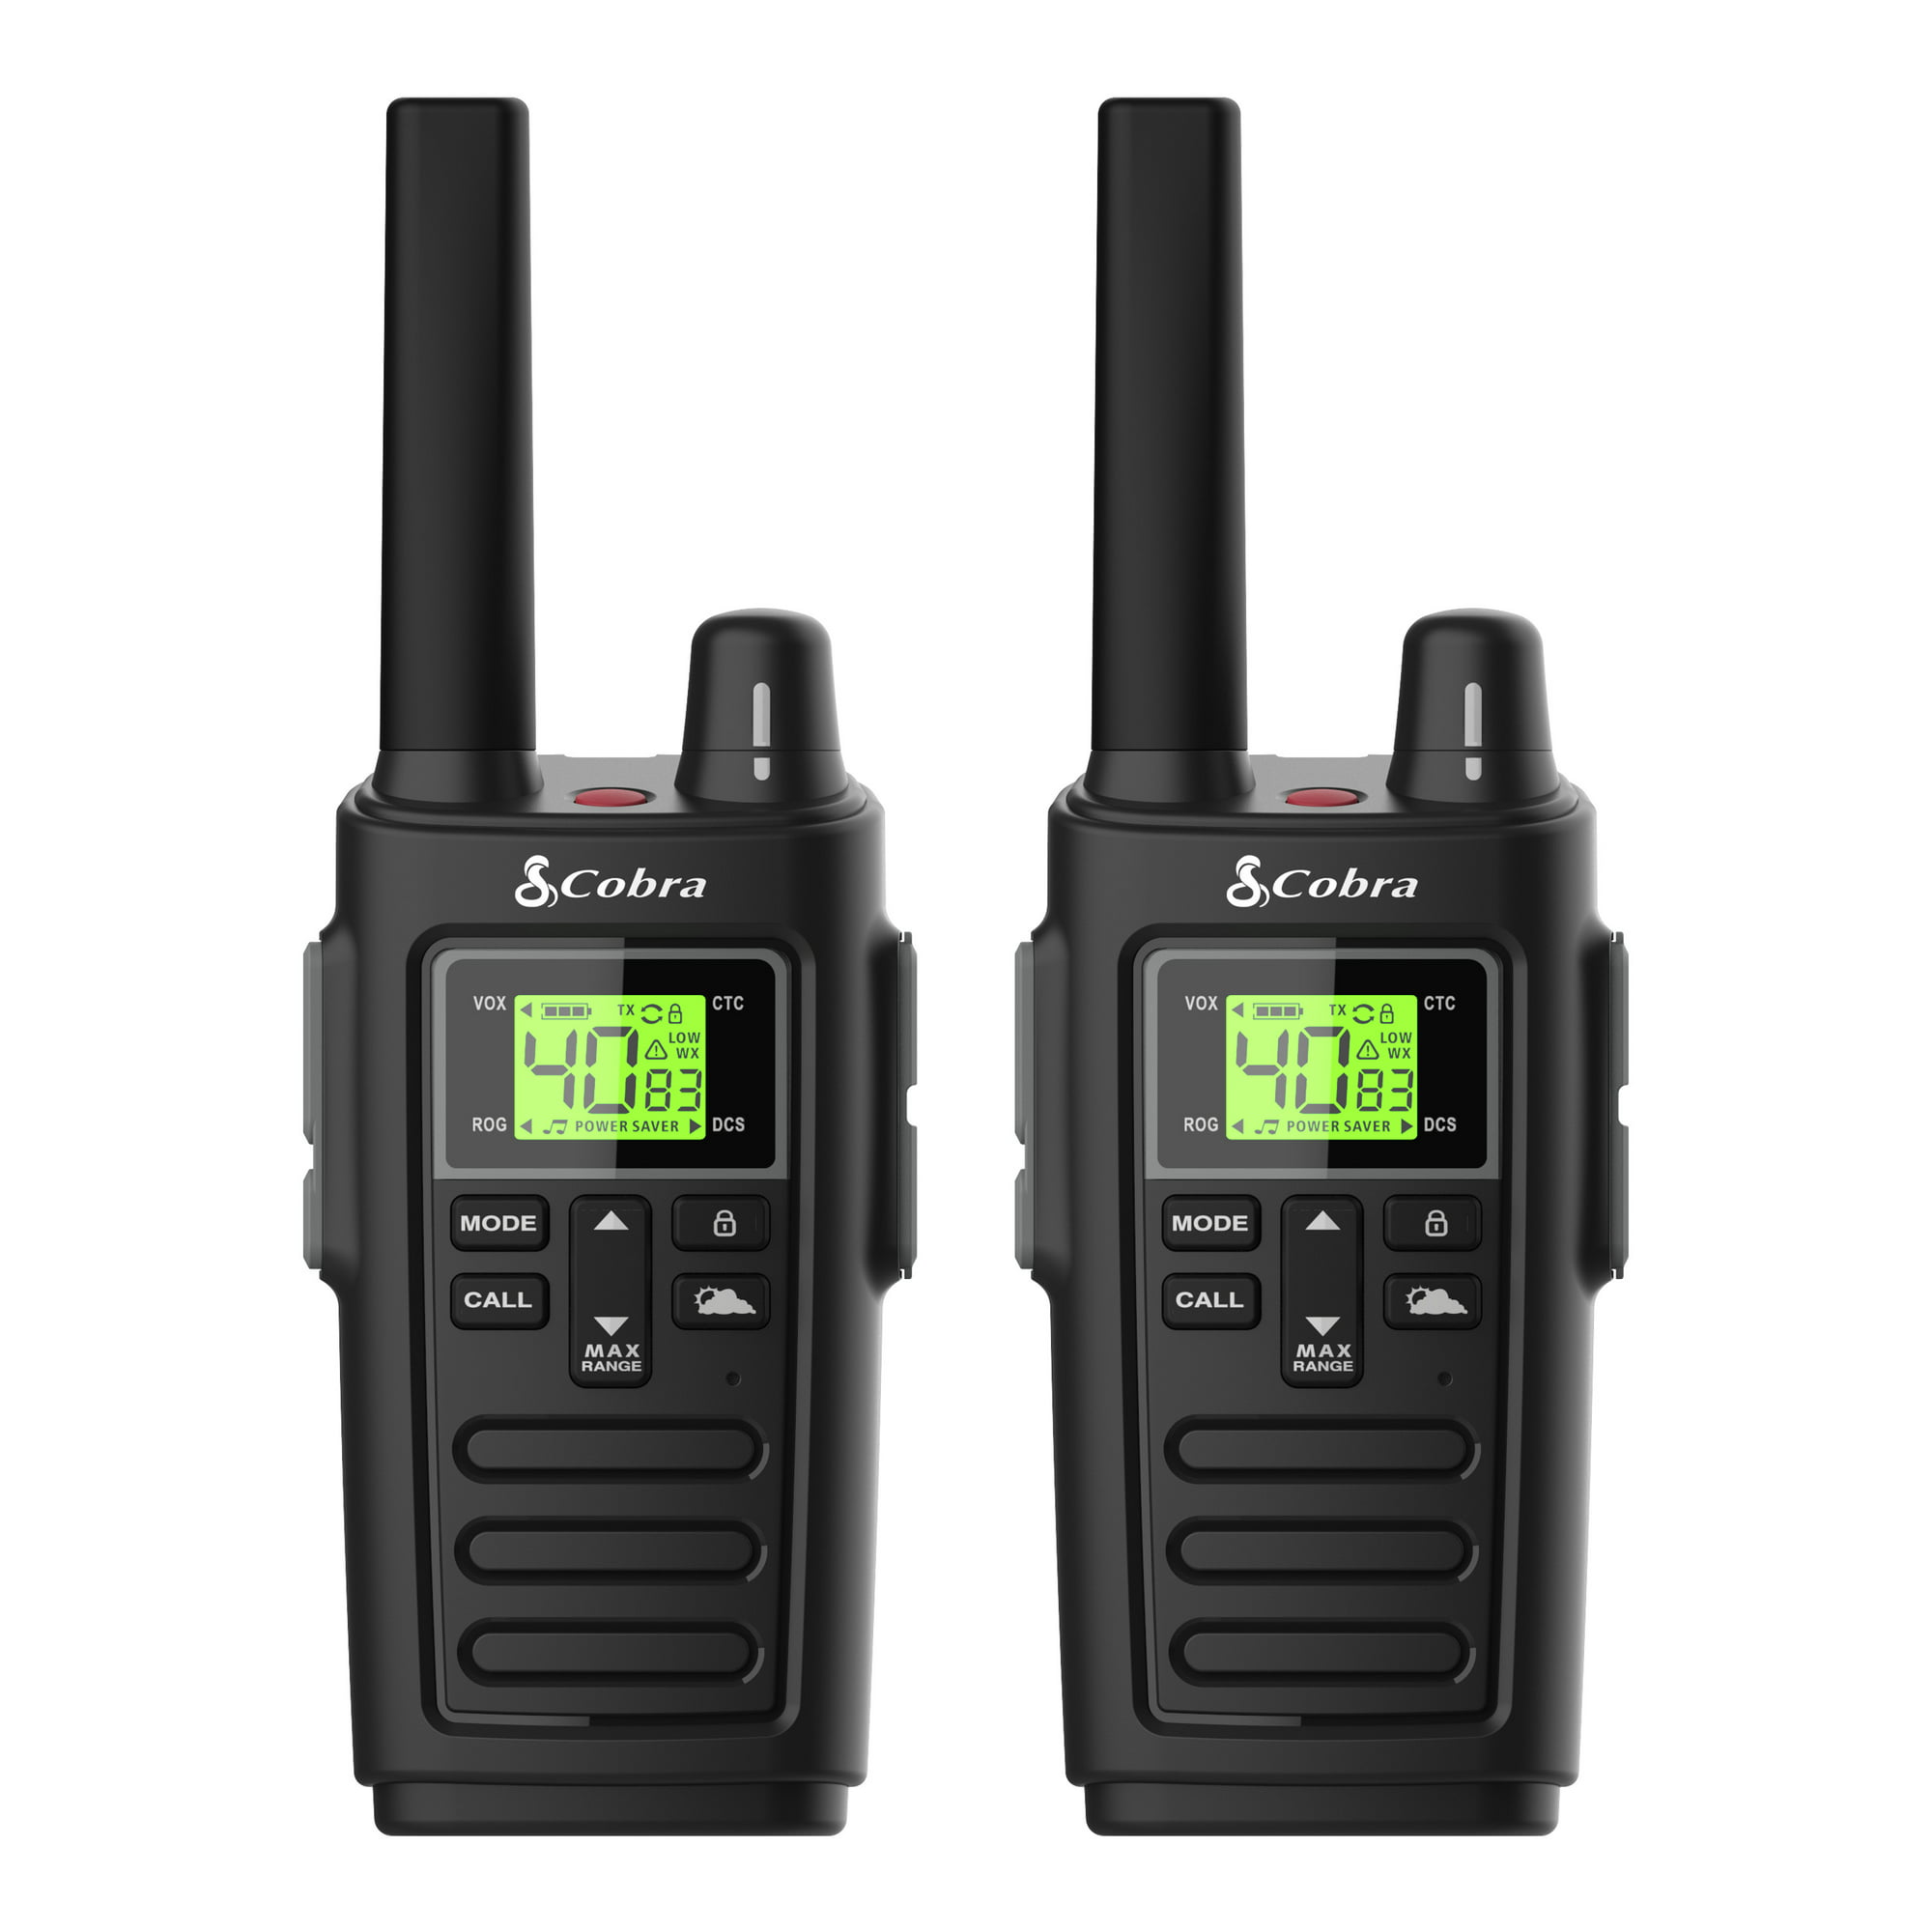 Cobra Two-Way Radios (Pair) Rugged Water Resistant Walkie Talkies, up to 32 mile Extended Range & 40 Channels, NOAA Weather Chanels and Weather Alerts - Walmart.com